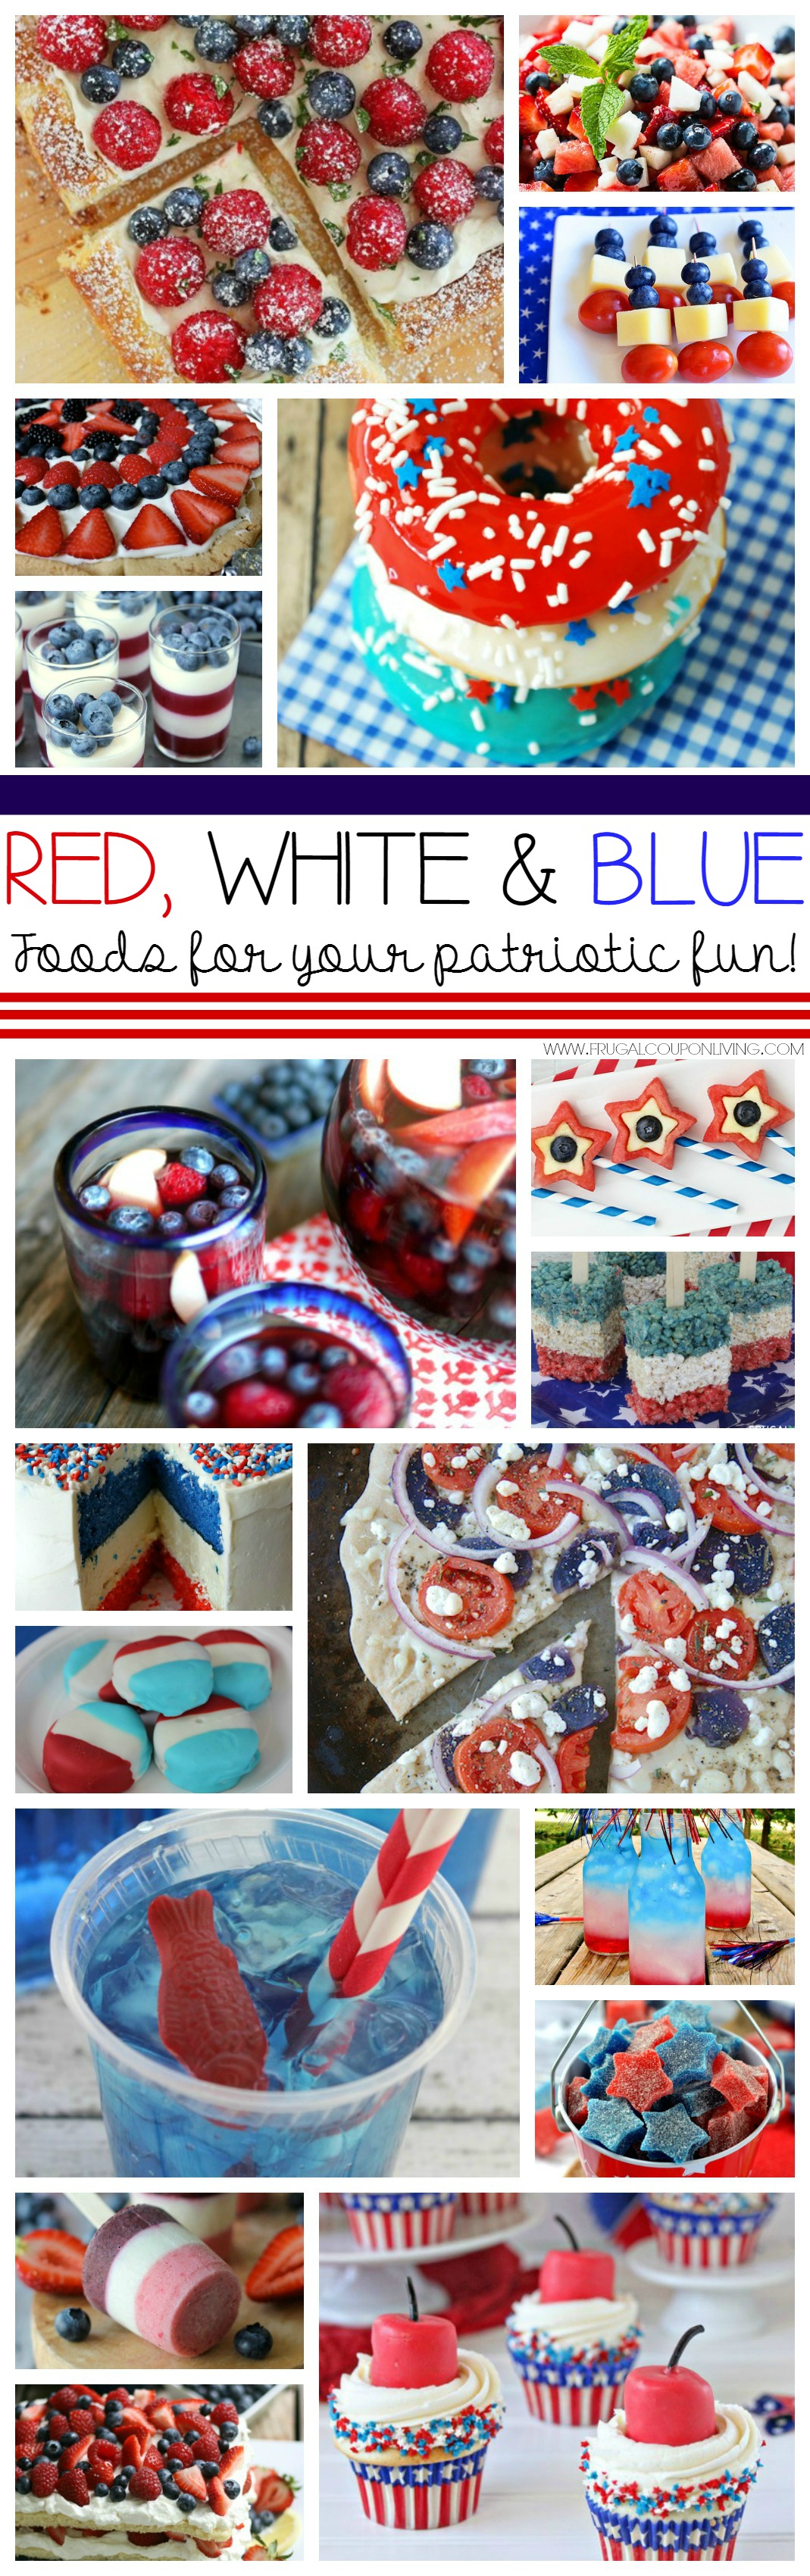 red-white-blue-foods-Collage-frugal-coupon-living